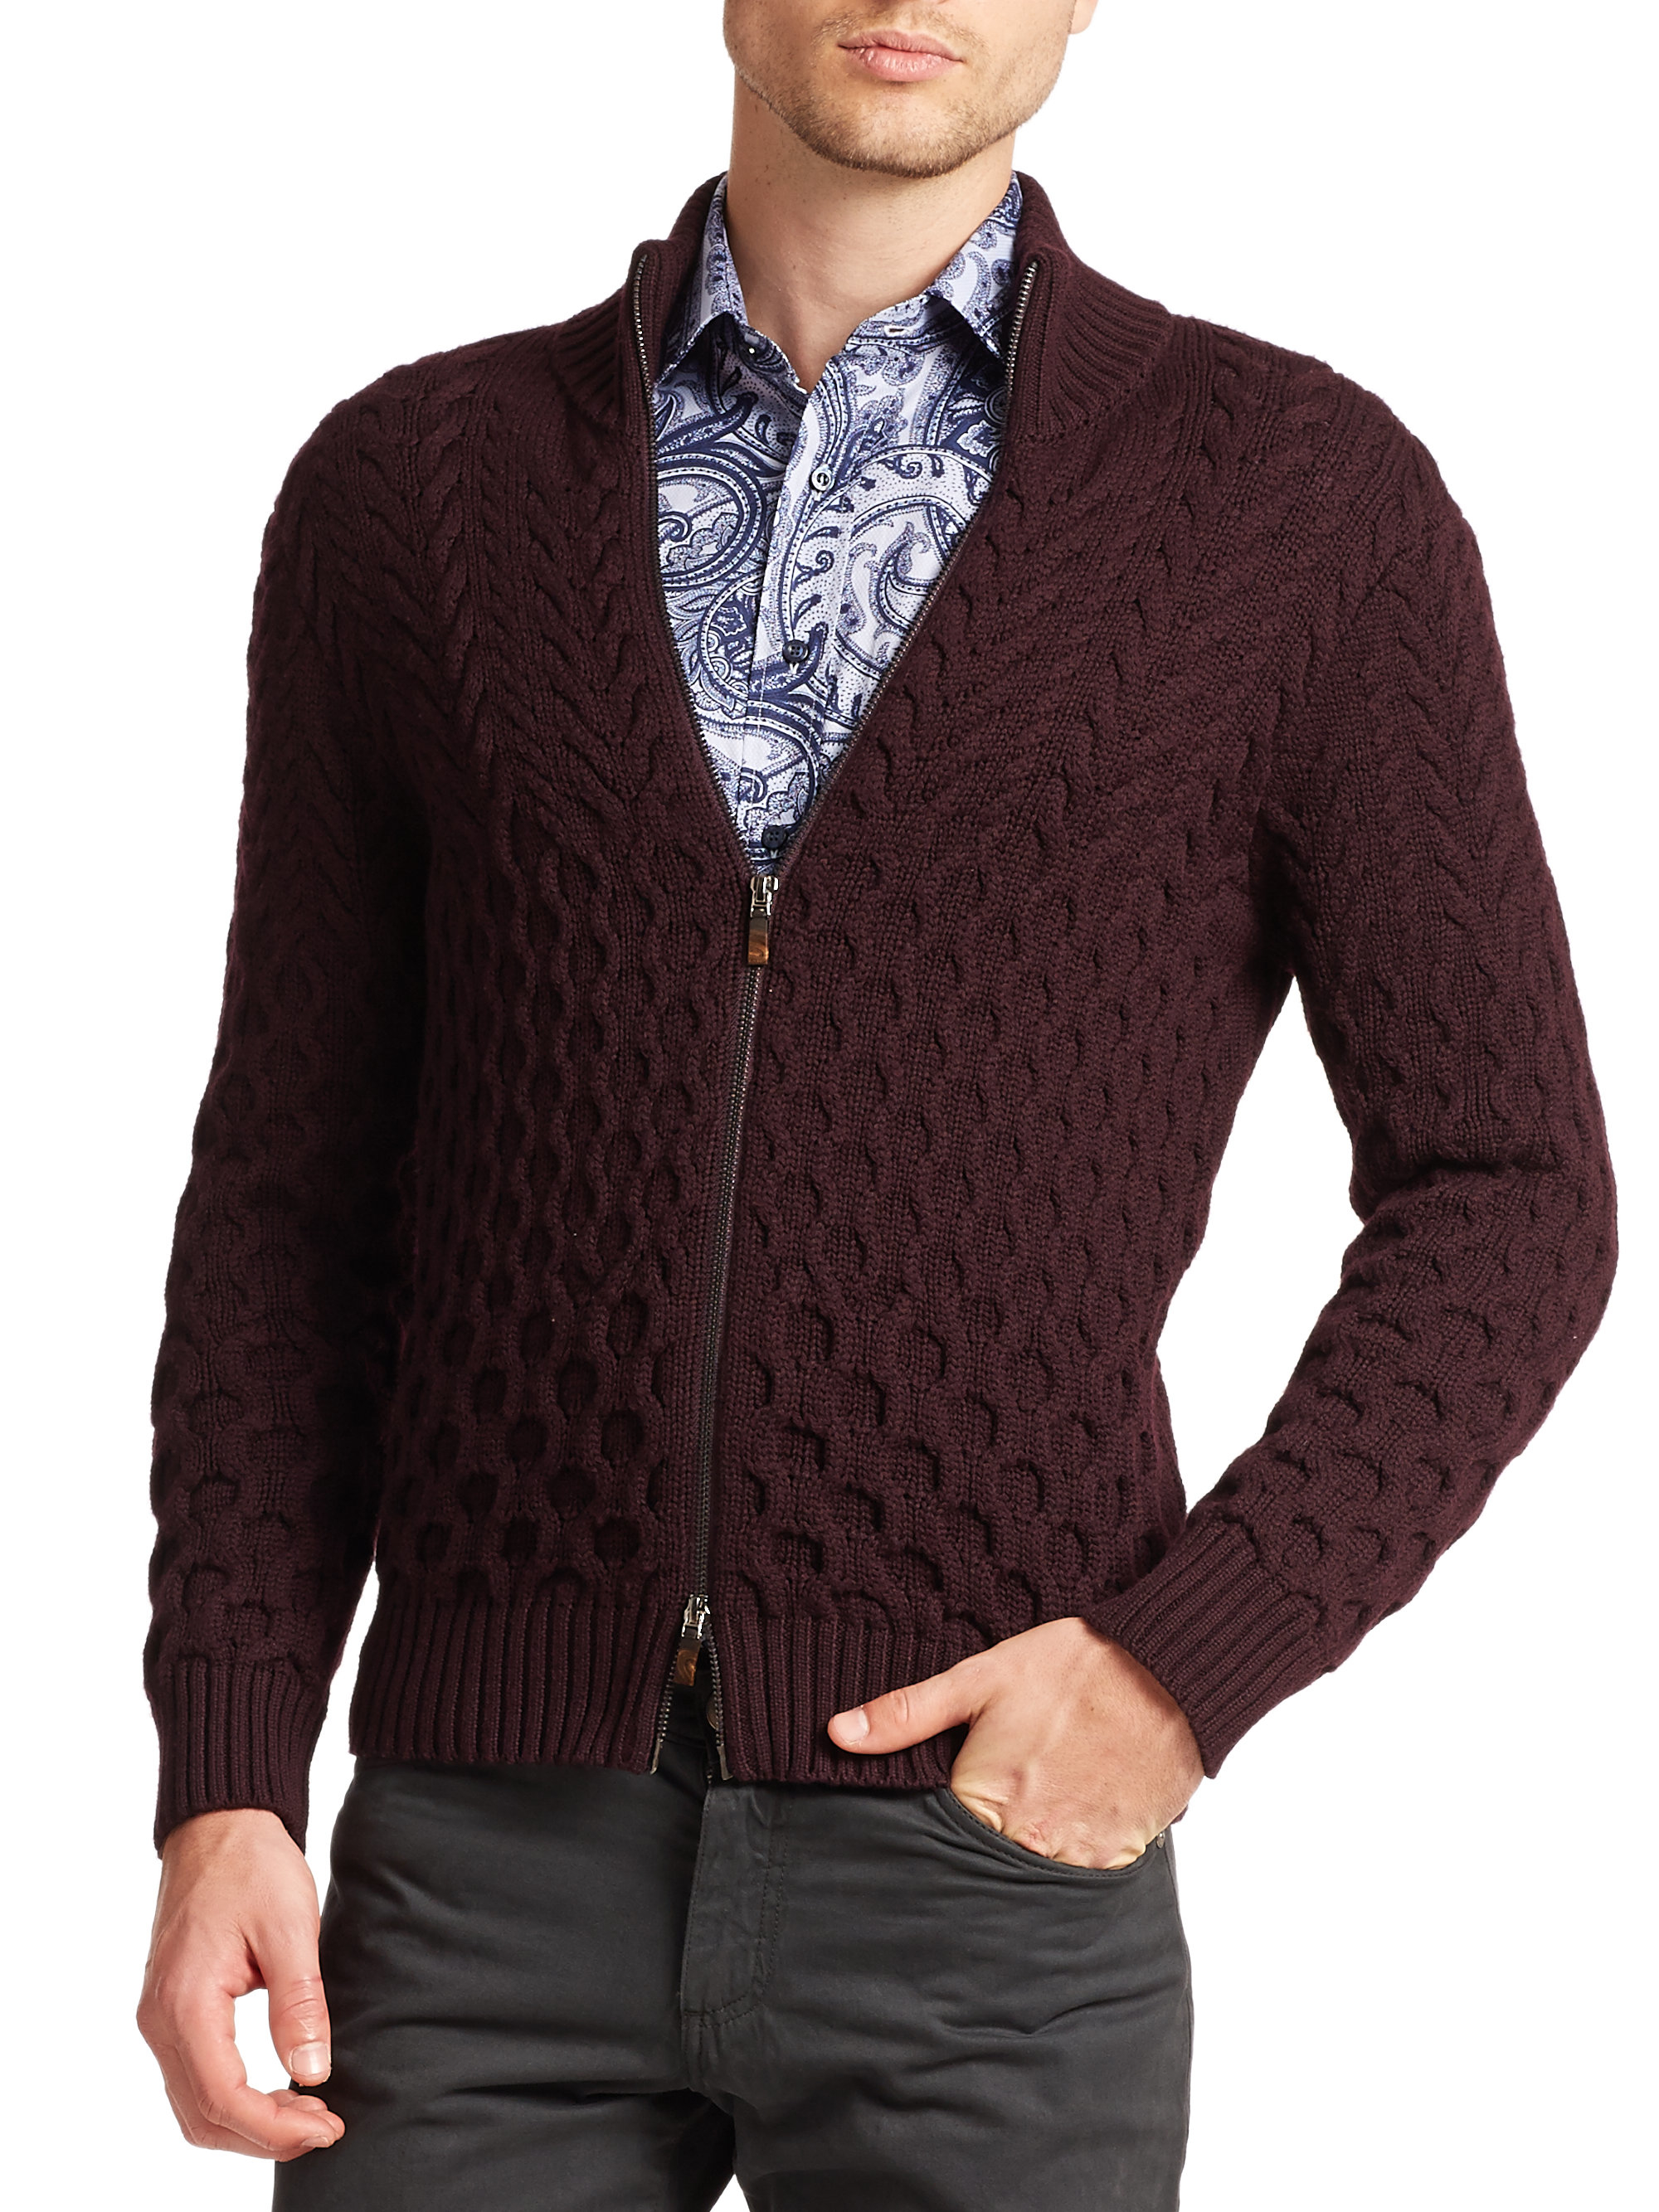 Lyst - Etro Mixed-knit Wool Zip Cardigan in Brown for Men